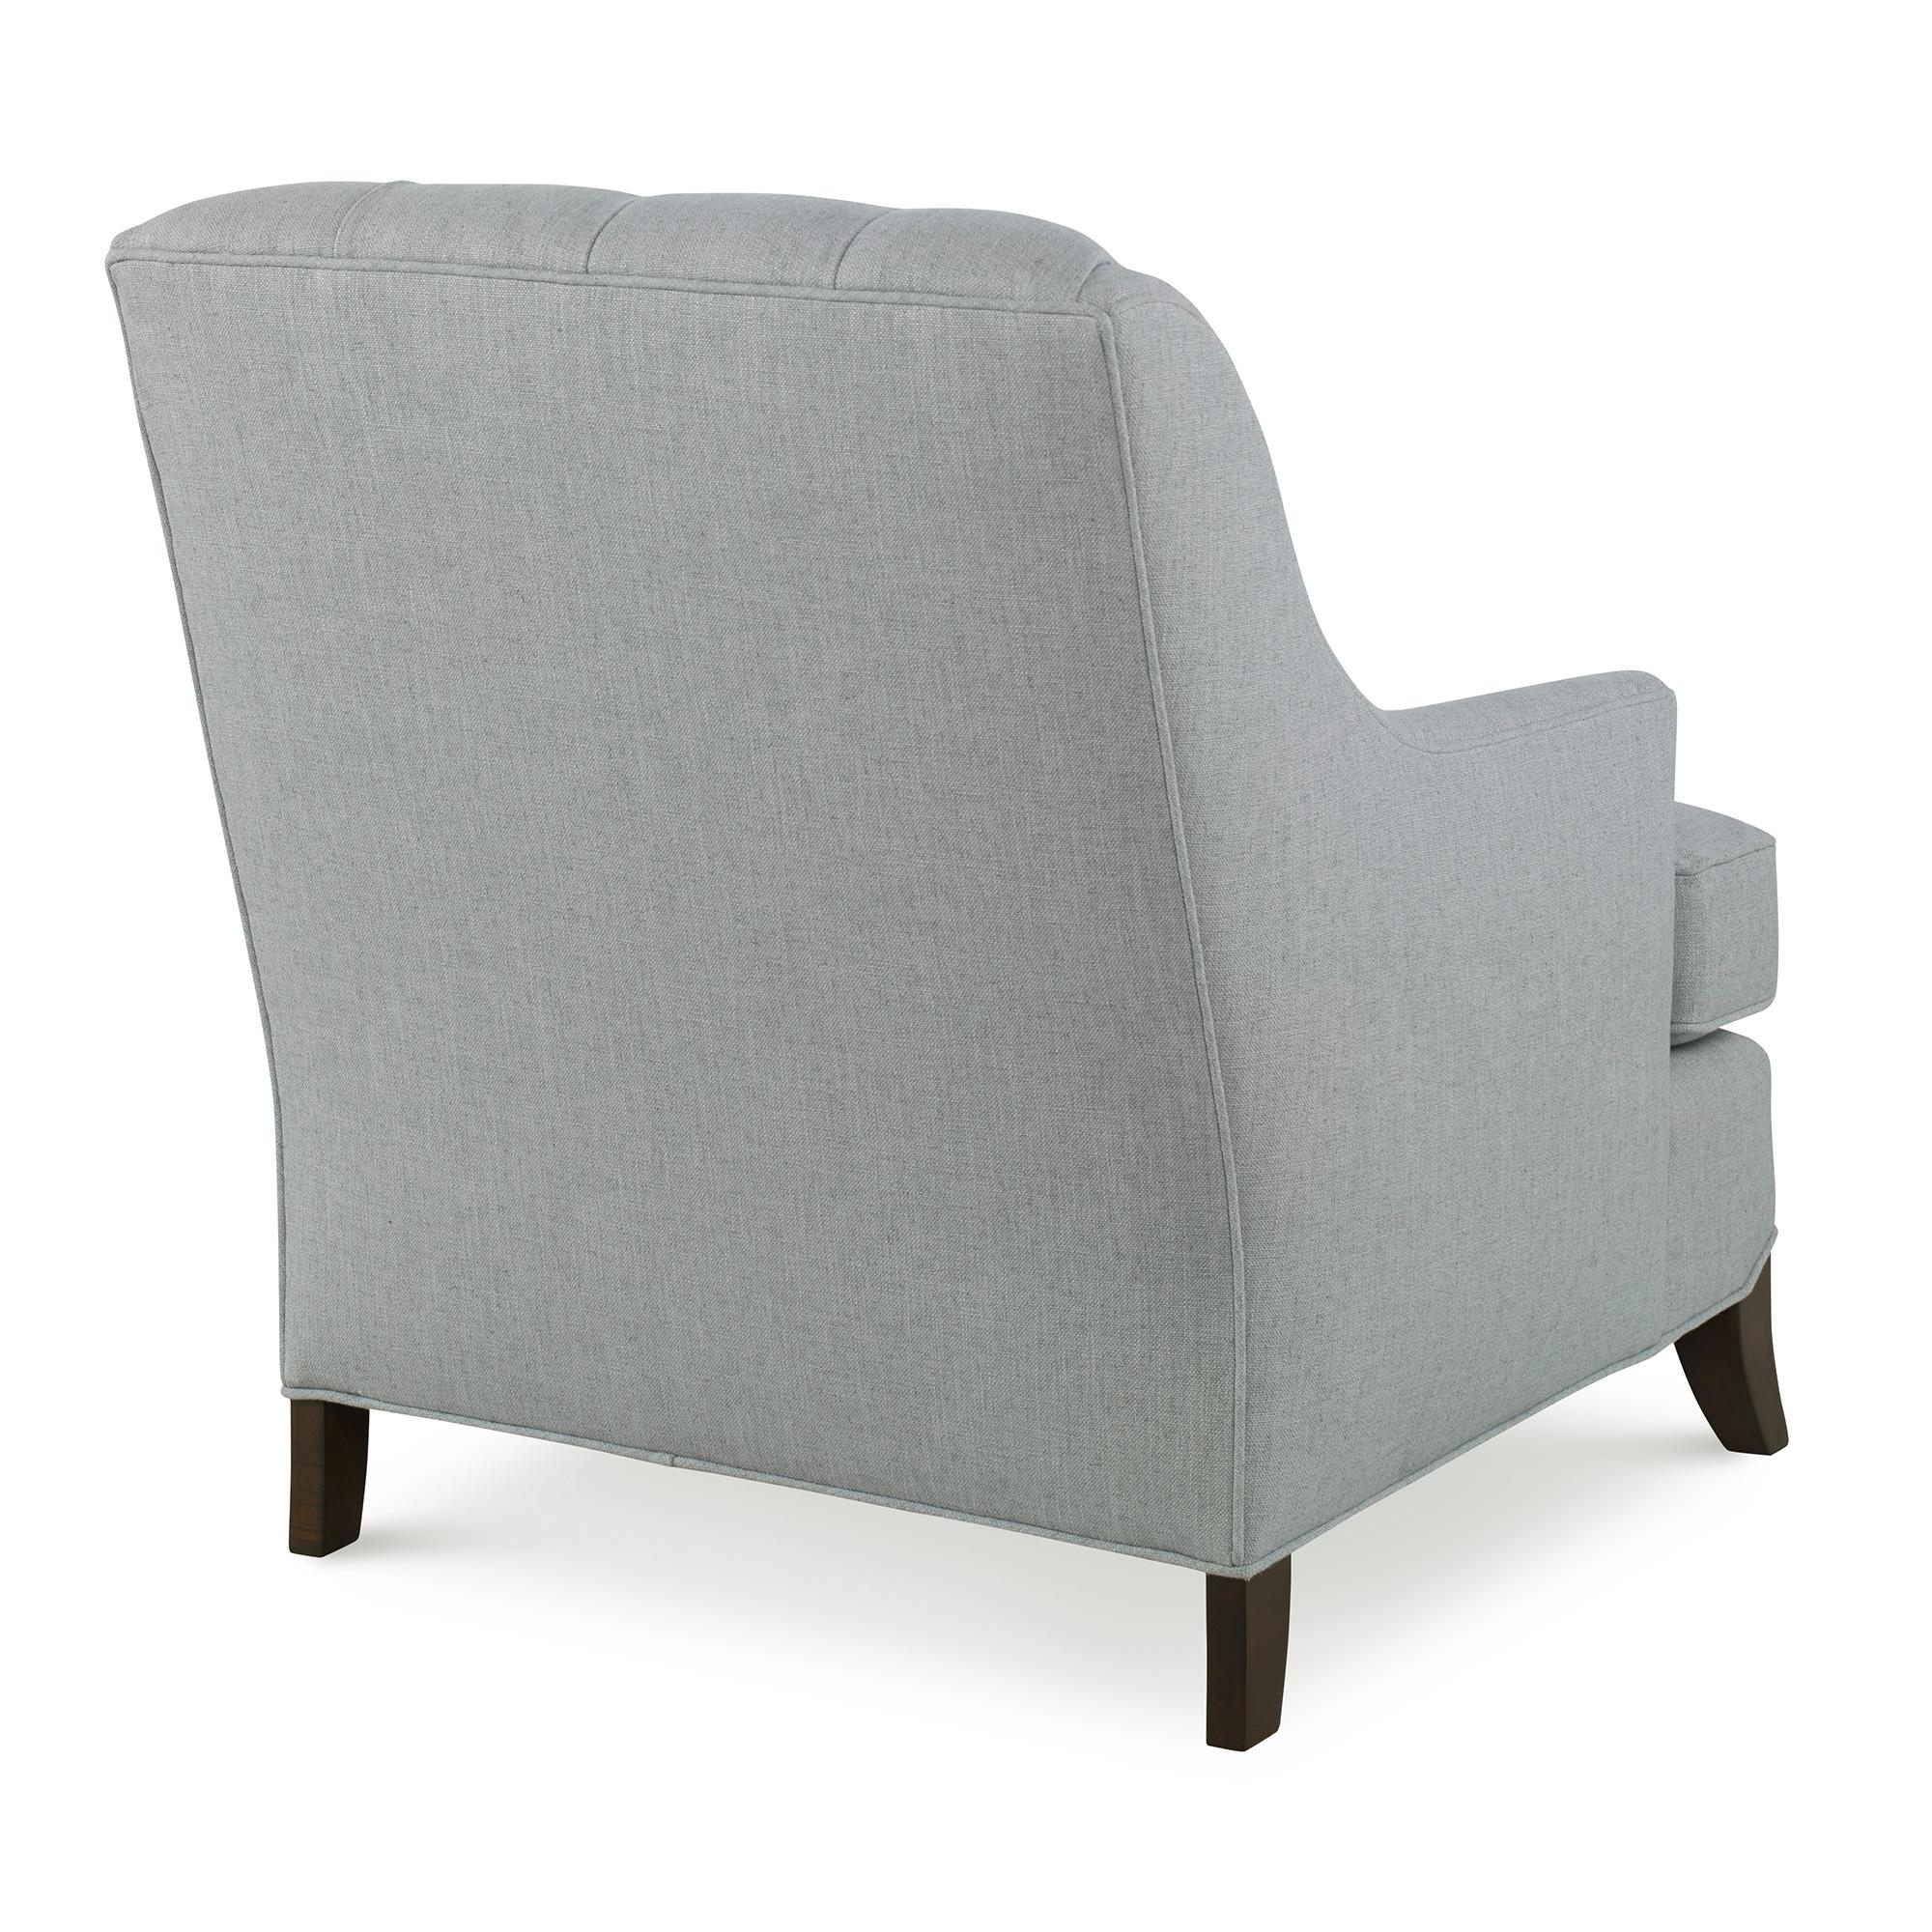 Modern Medley Chair in Gray by CuratedKravet